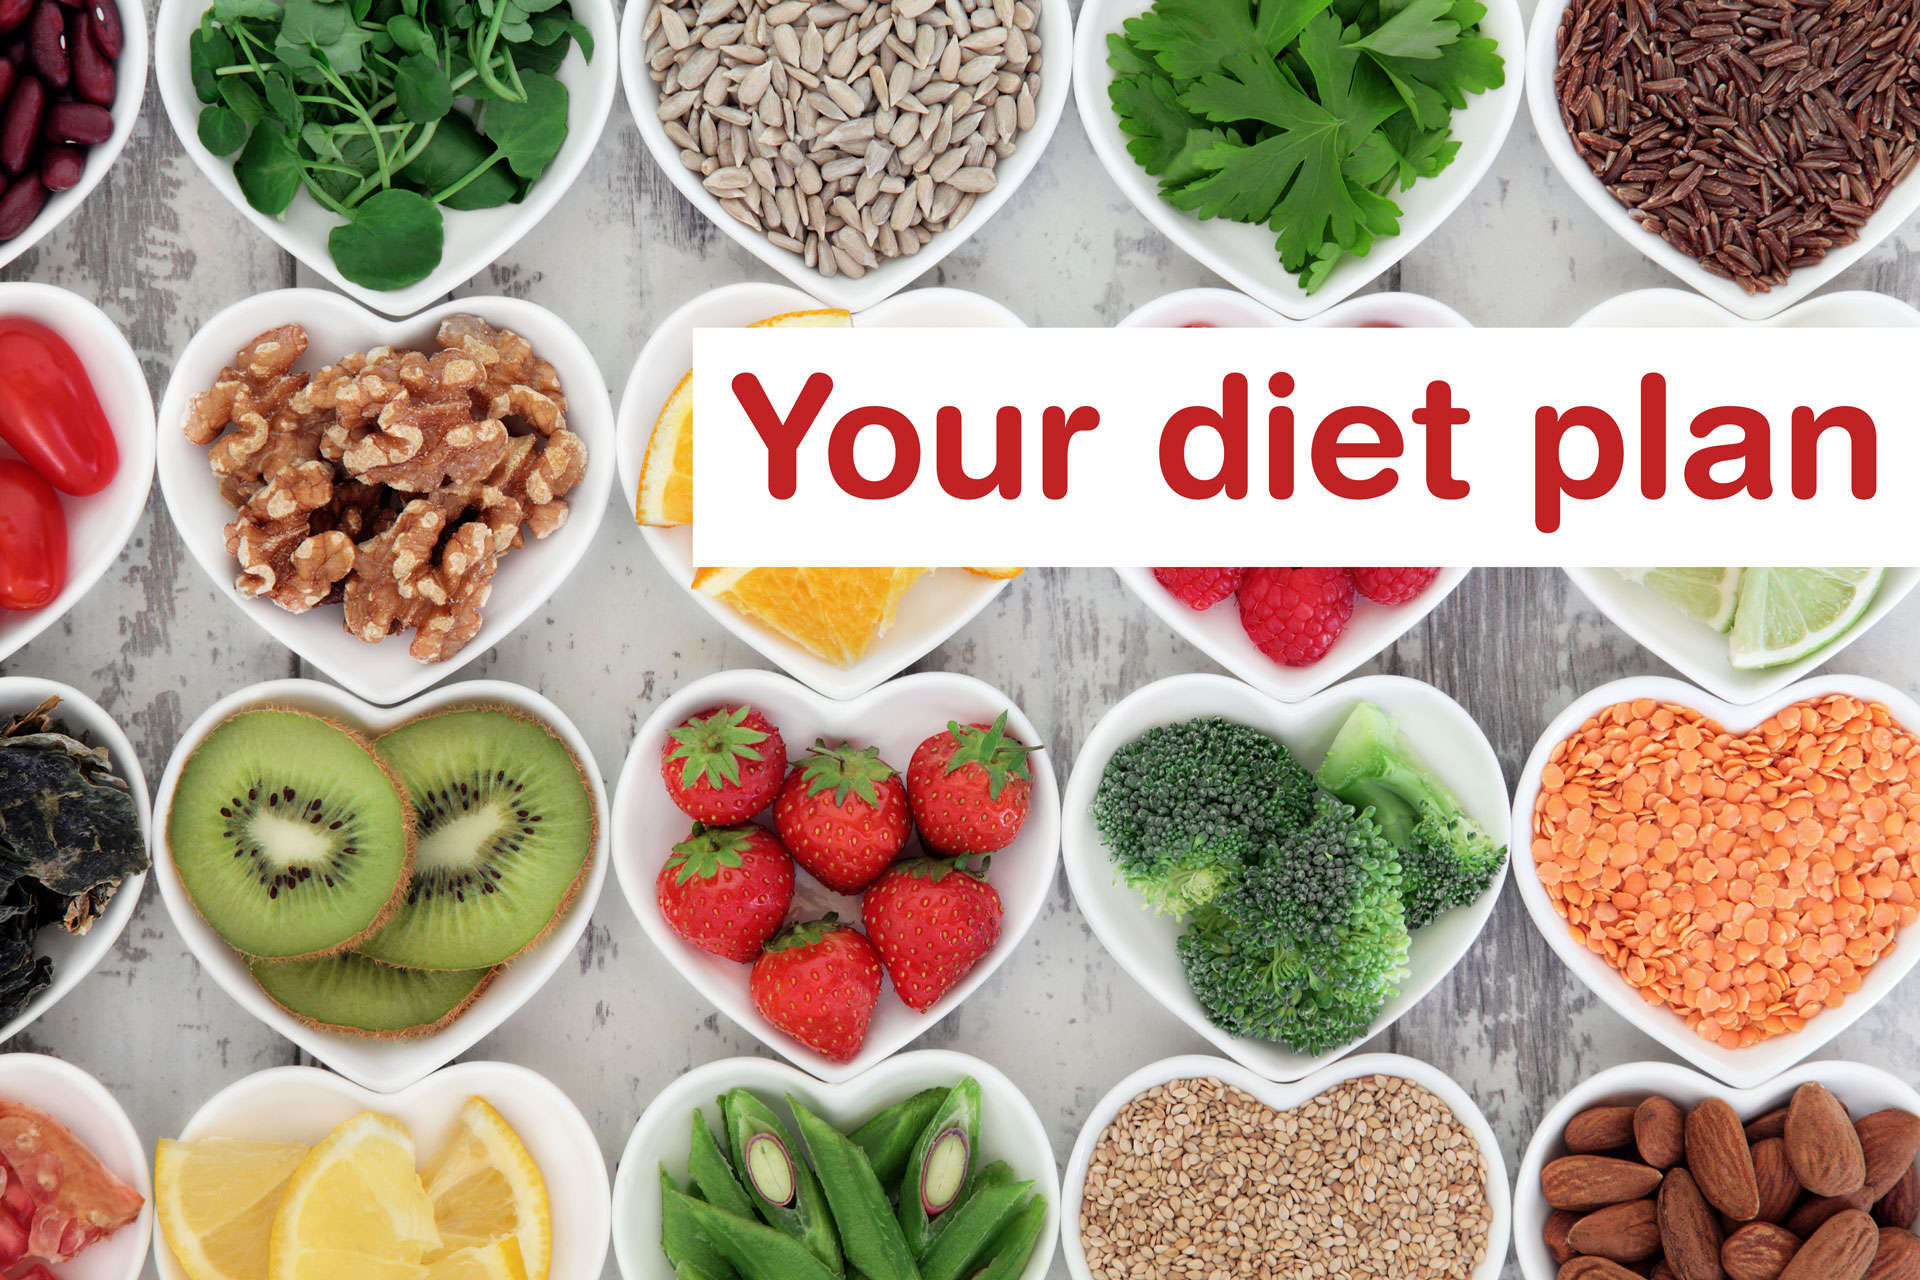 How to make a diet plan that works - The Dutrition Blog